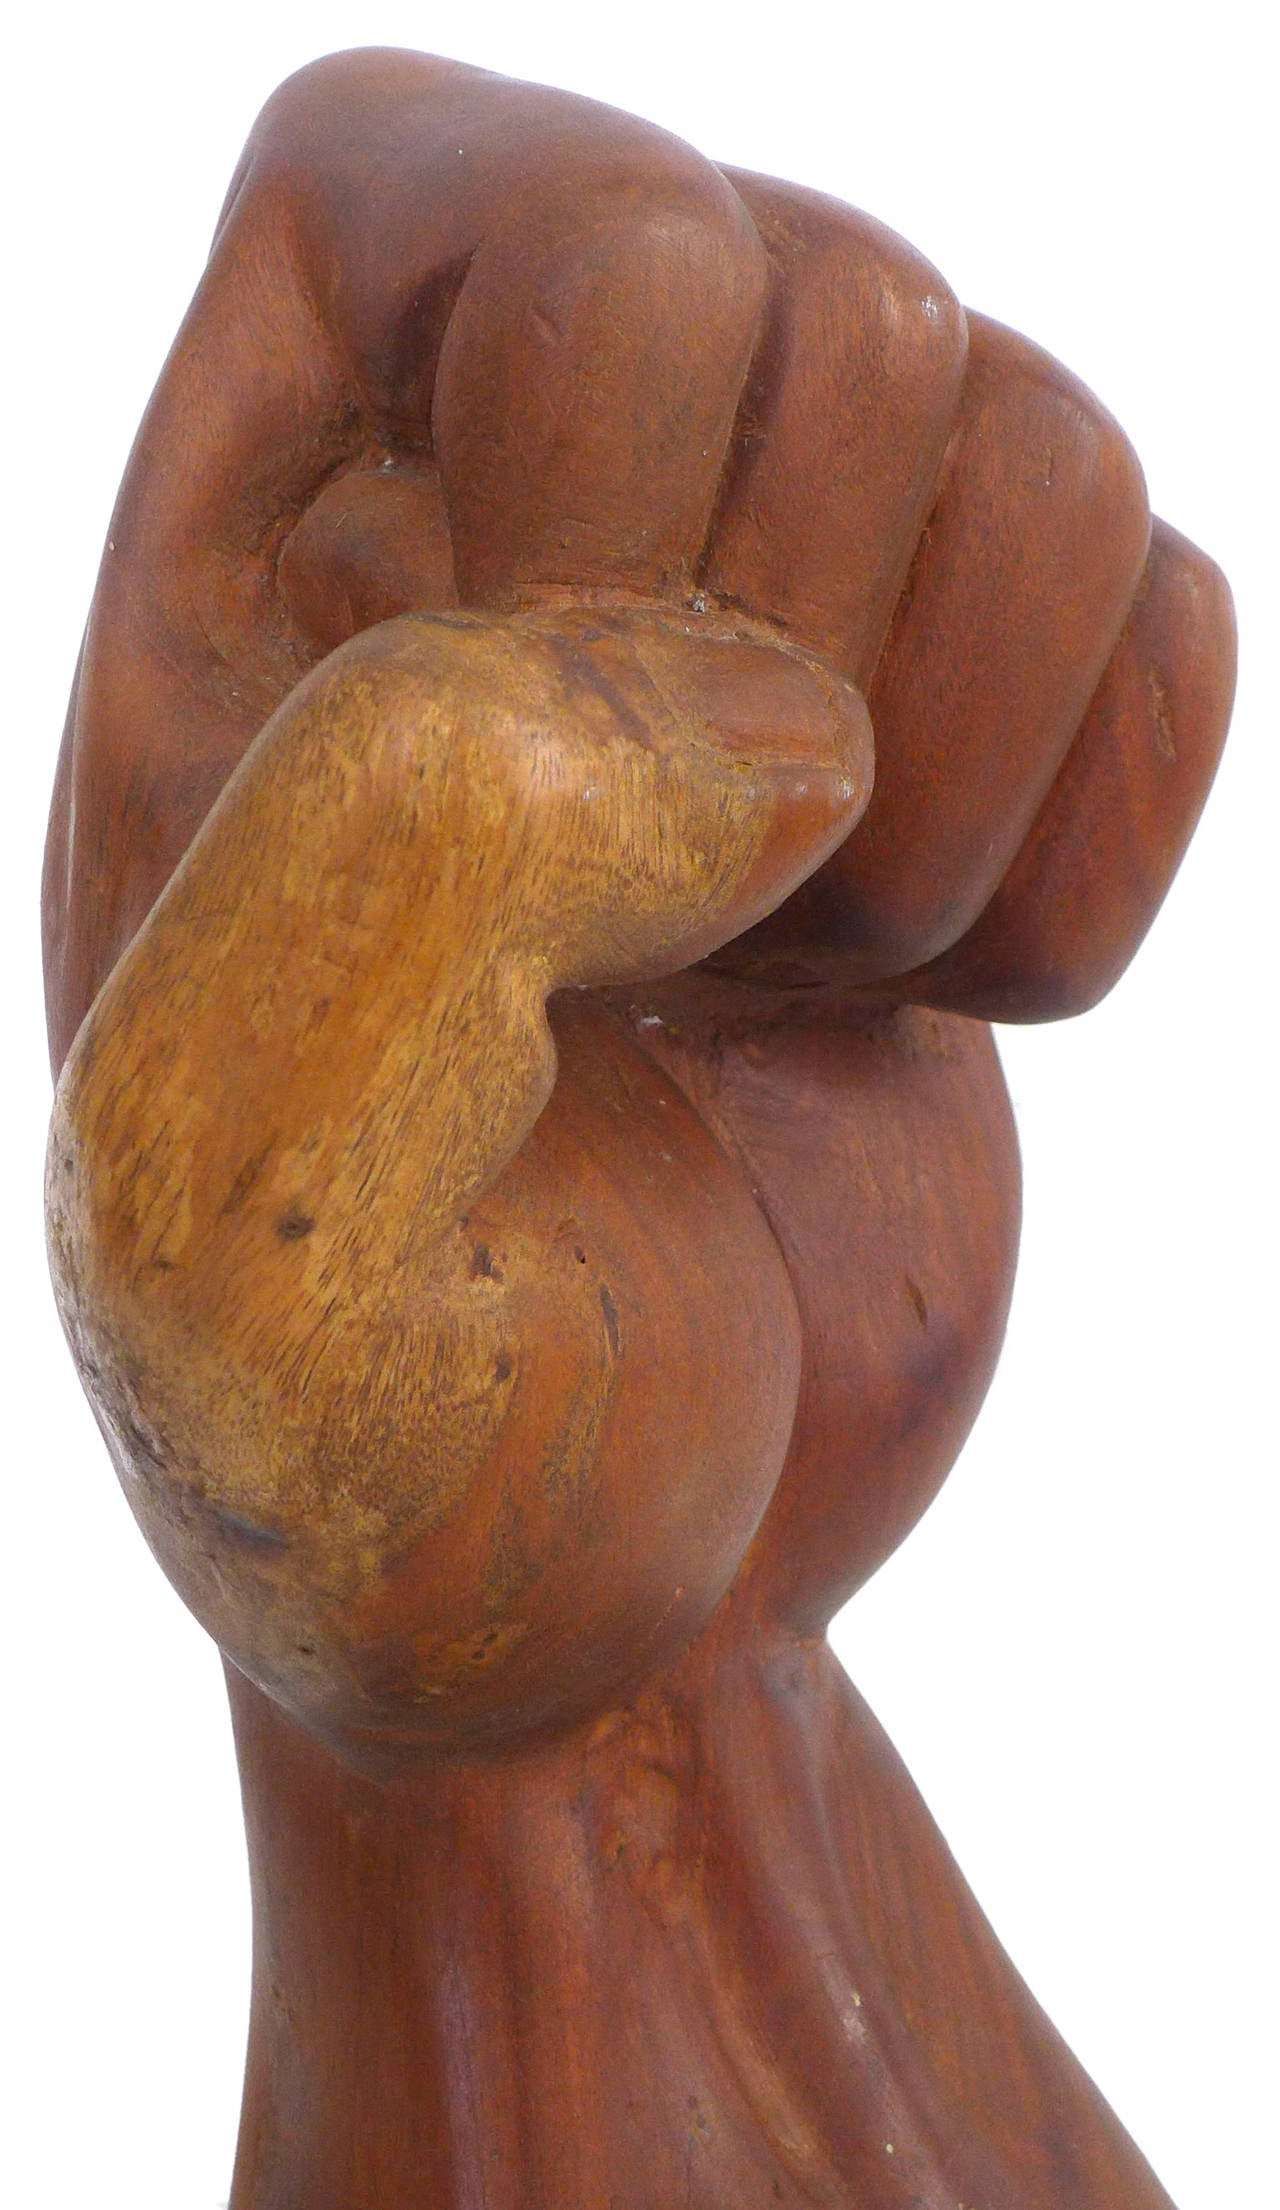 A beautifully-carved, exaggeratedly-realist, wood carving of a raised, clenched fist.  Wonderful scale, detail and execution.  A bold statement of solidarity and defiance in a strong organic medium.